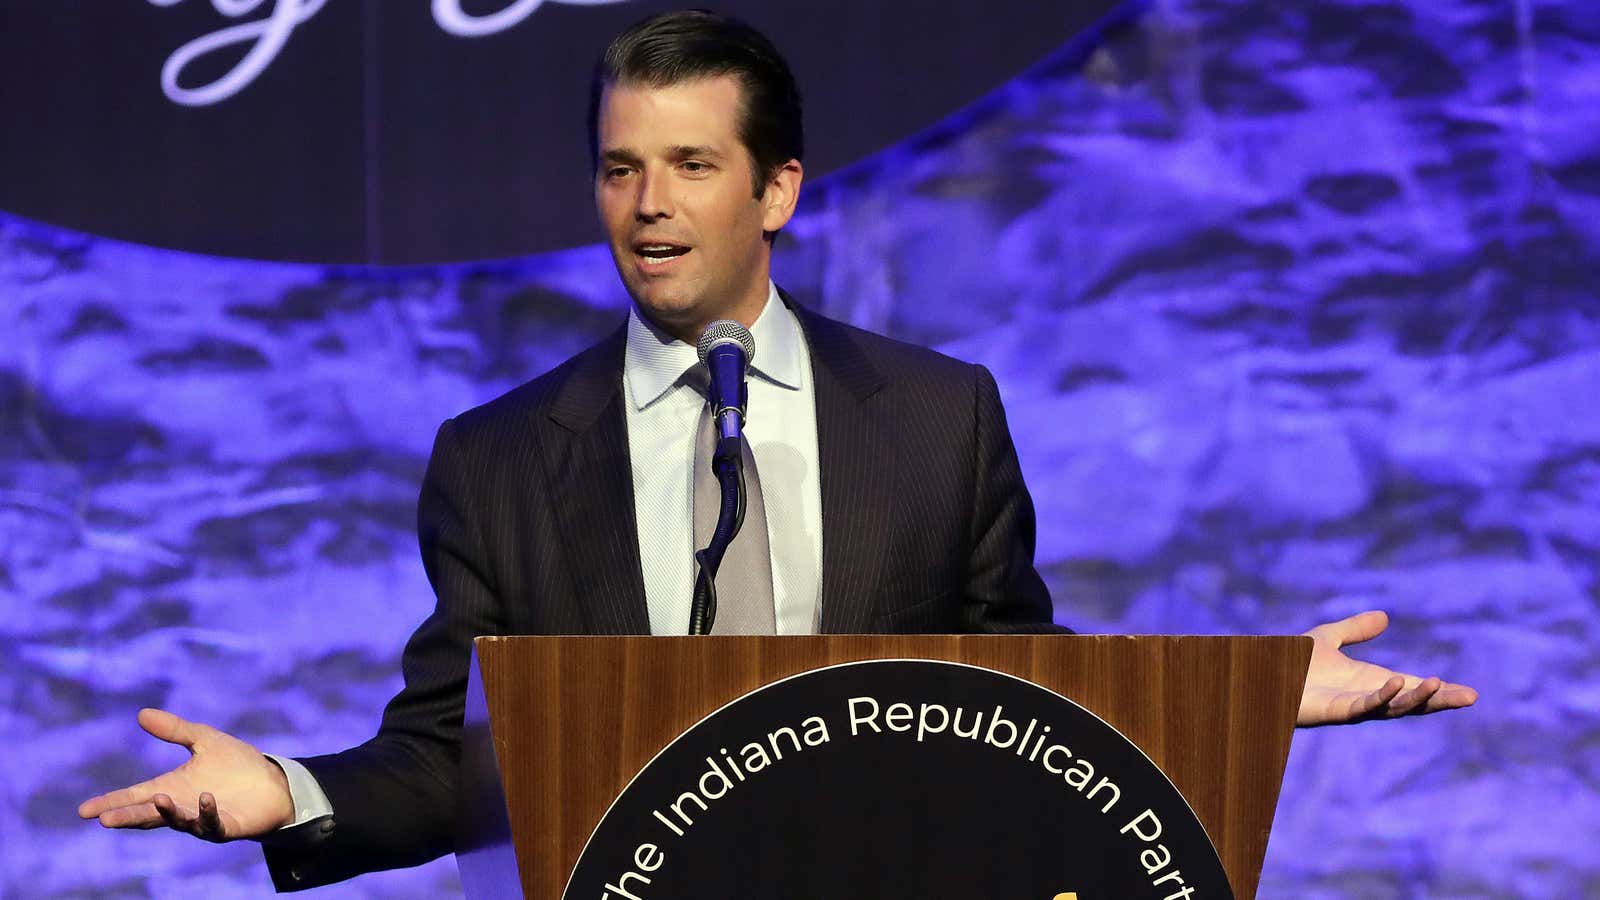 “If it’s what you say, I love it,” Trump Jr. wrote.